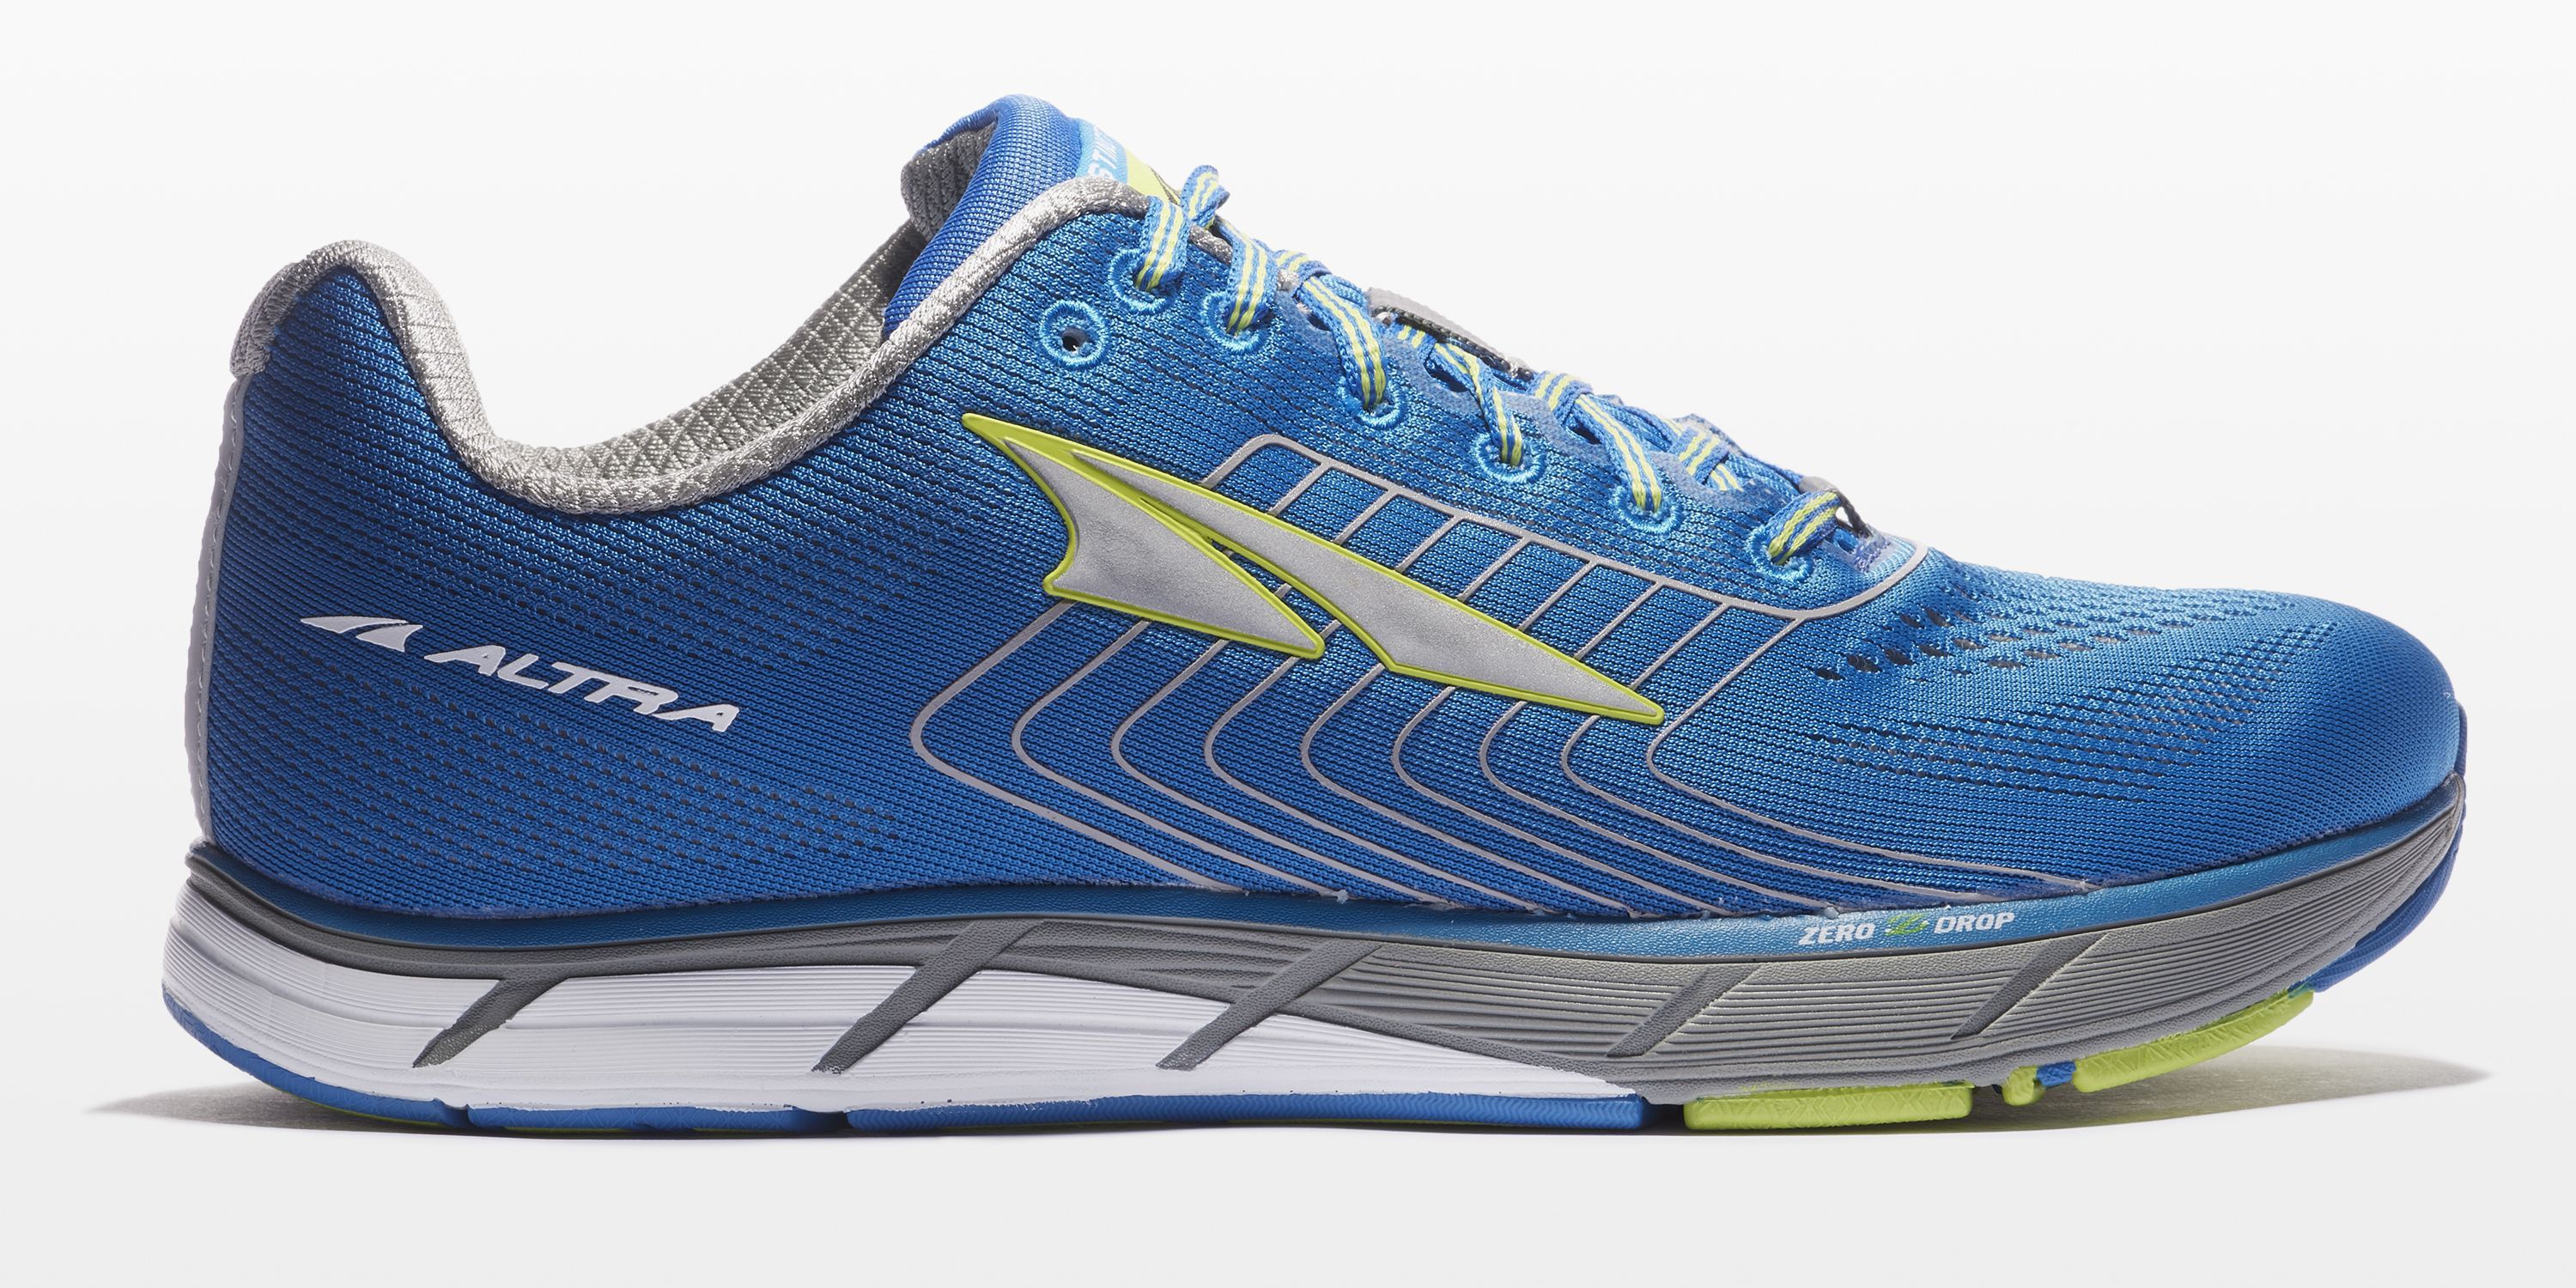 altra shoes retailers near me 041a7c